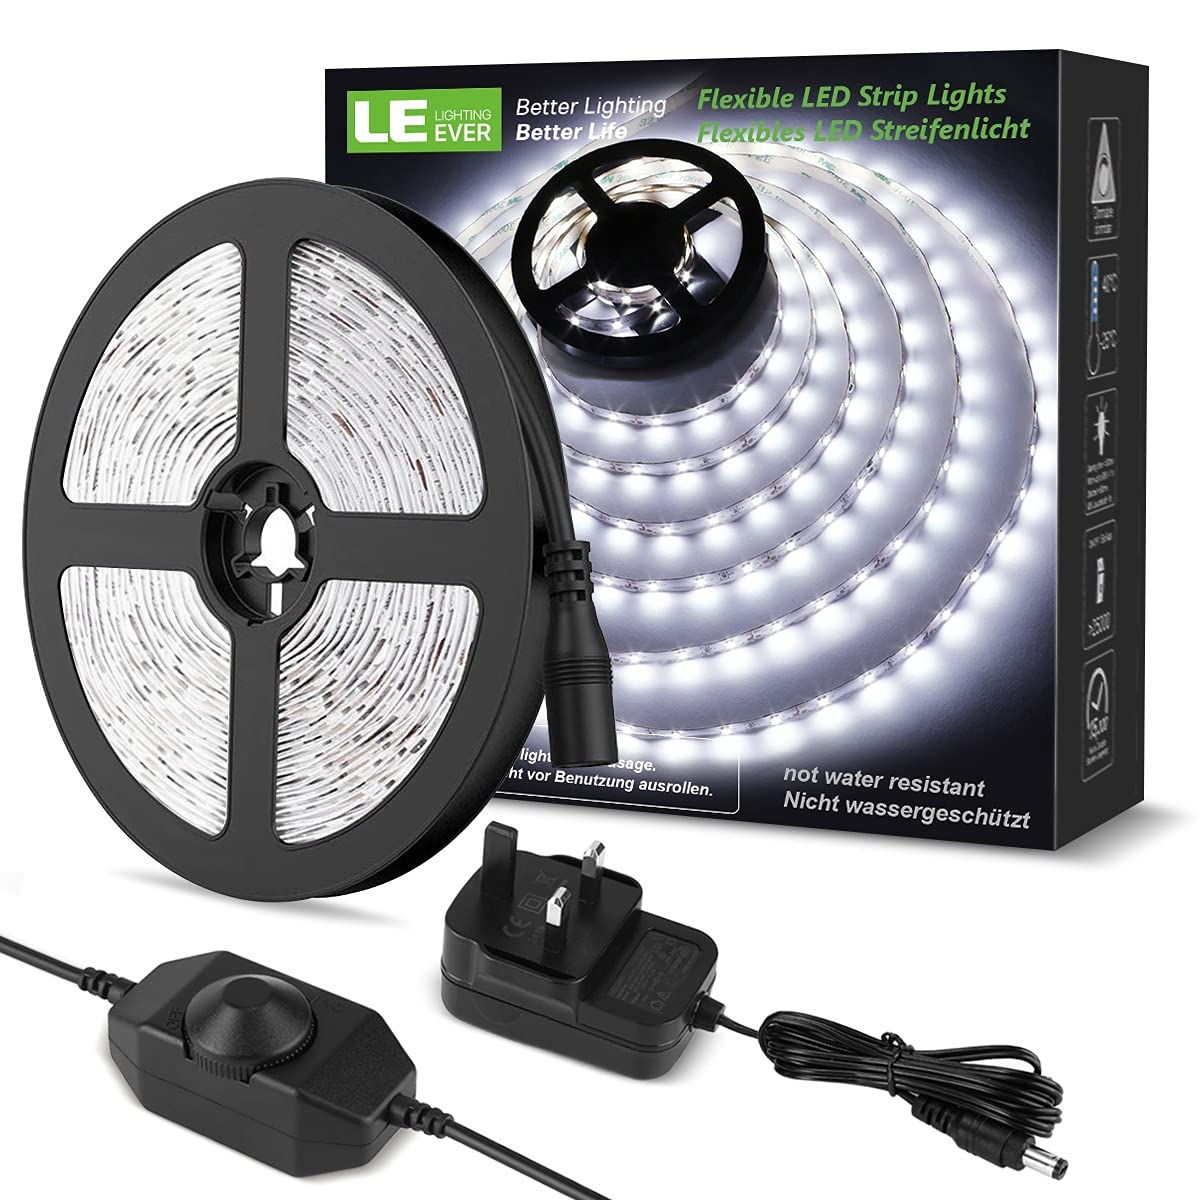 LE 5M LED Strips Lights Kit, Dimmable, 1200lm, Daylight White 6000K, Plug and Play LED Tape Light for Home Kitchen Bedroom and More, 12V Power Supply and Dimmer Switch Included